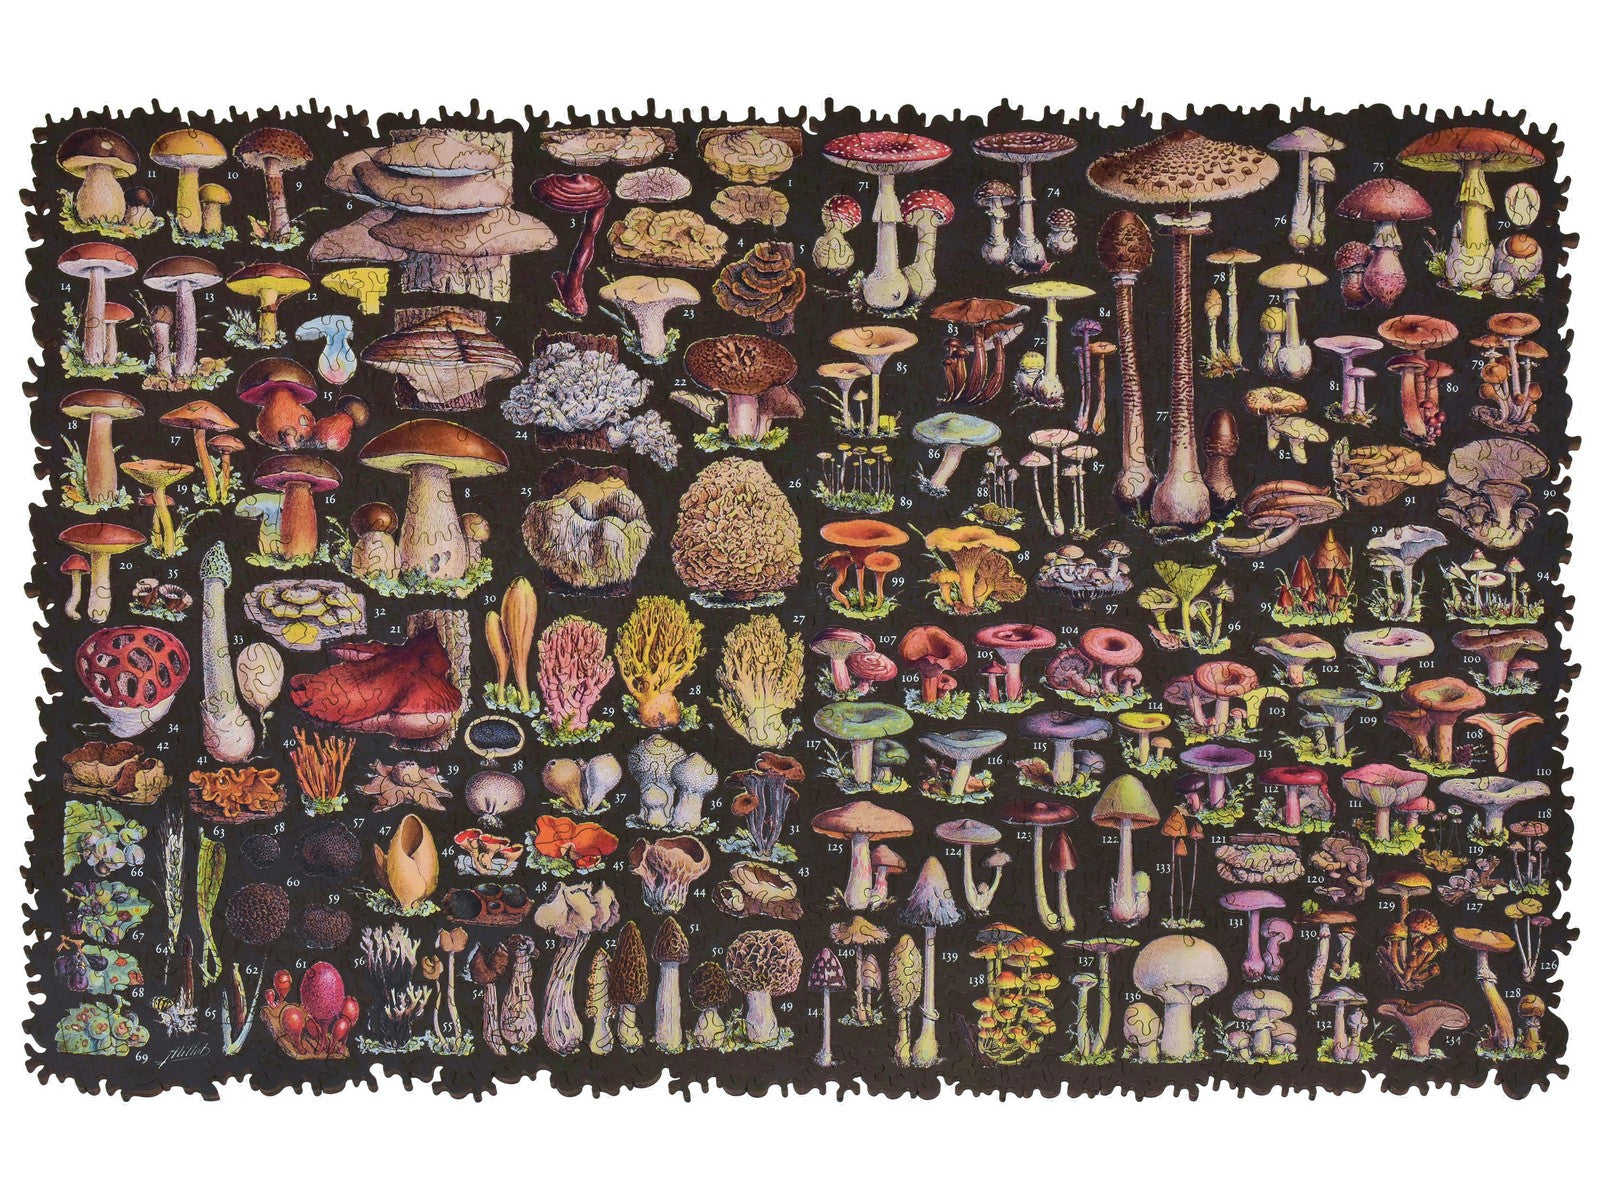 The front of the puzzle, Mushrooms, which shows a vintage reference print of various kinds of mushrooms.